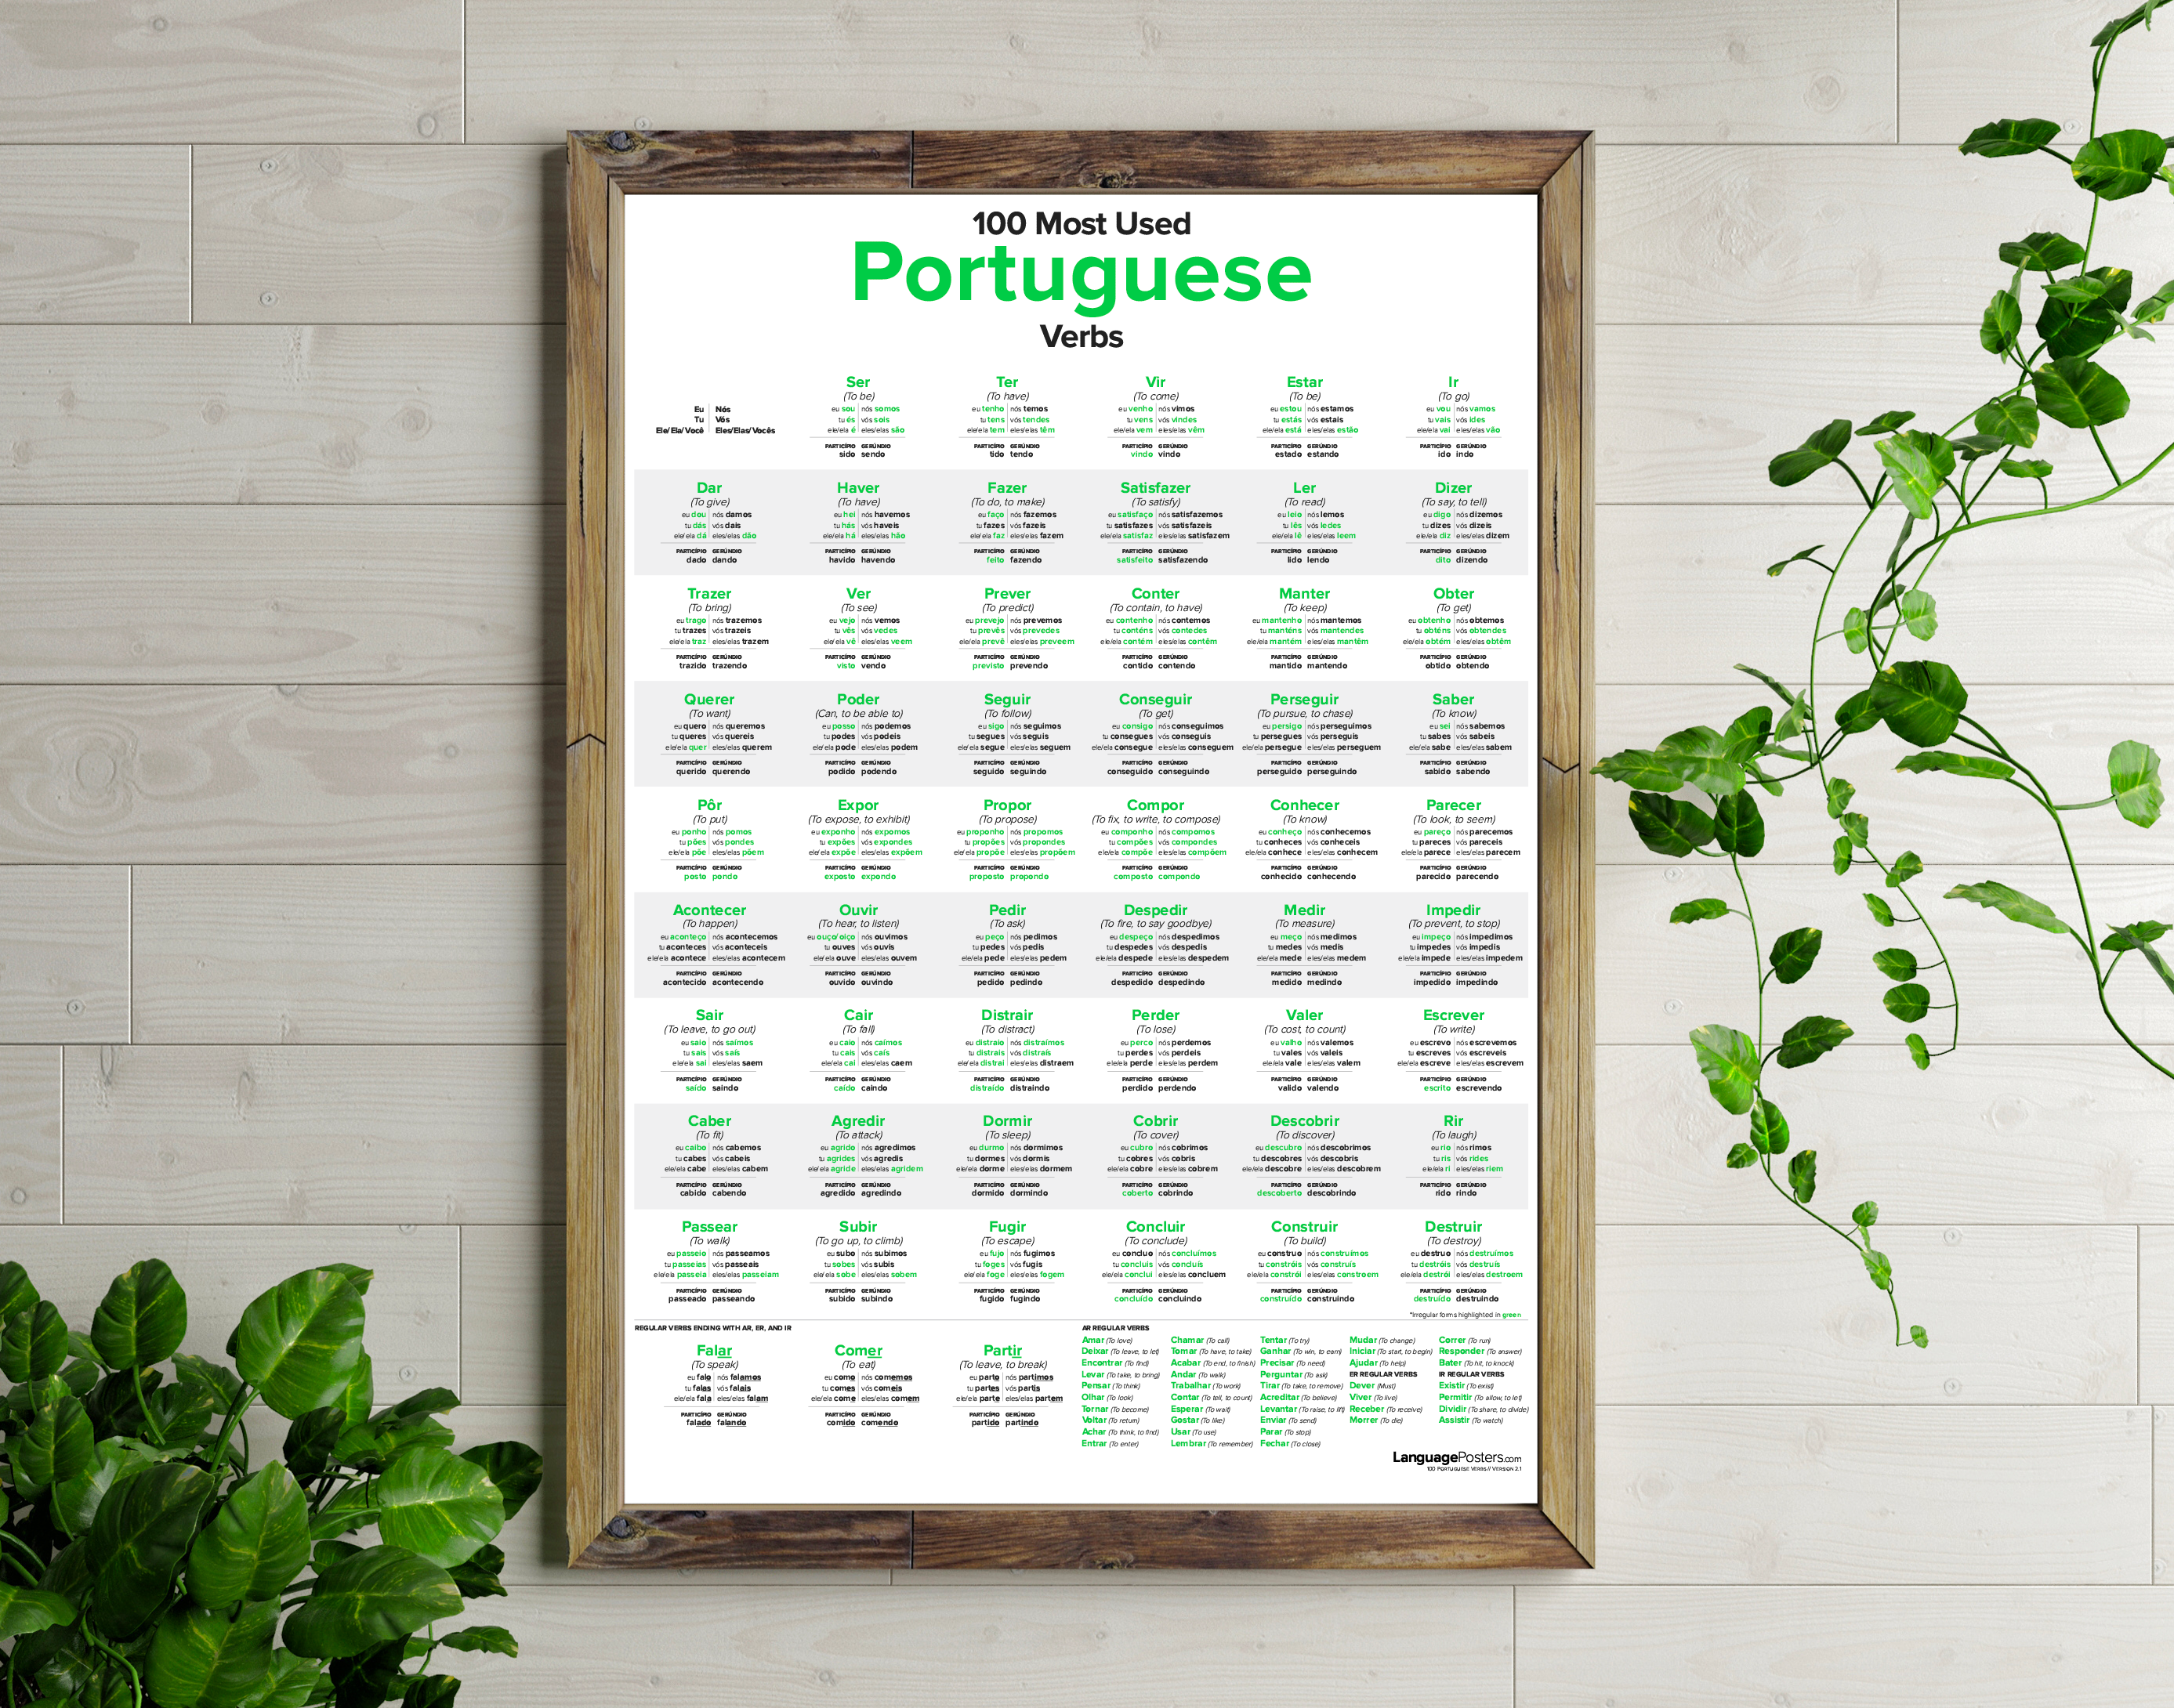 100 Most Used Portuguese Verbs Poster - LanguagePosters.com